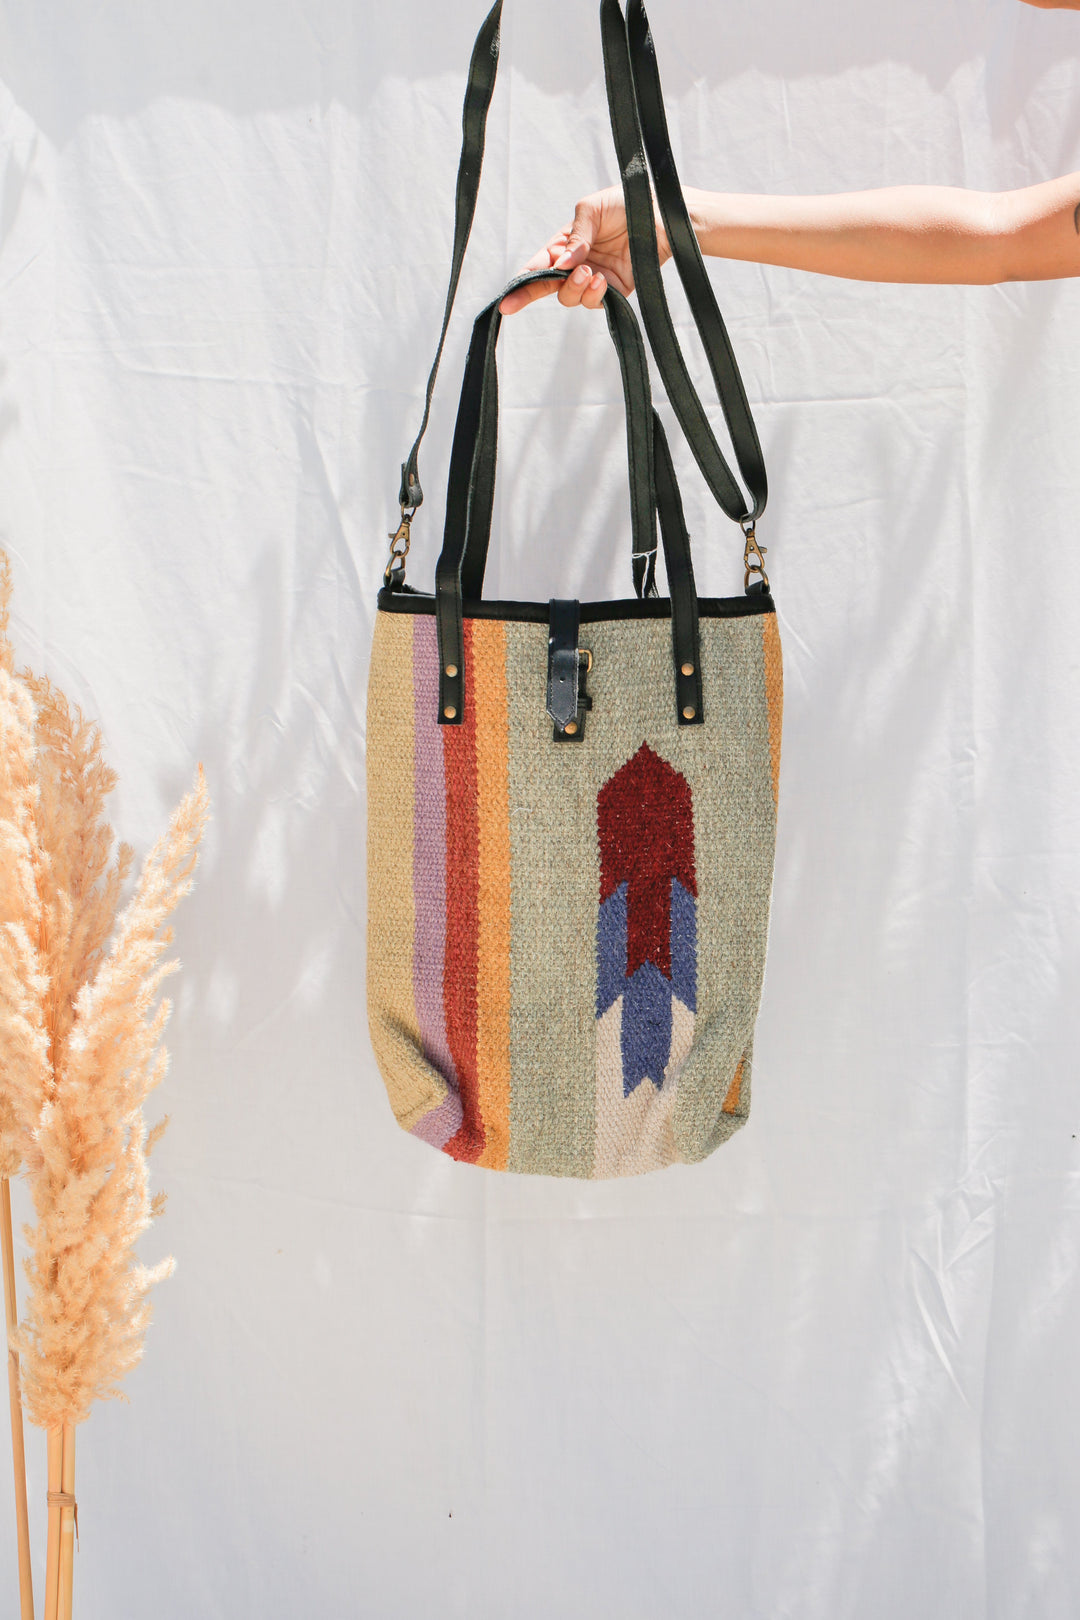 Woven Cotton Tote - Kingfisher Road - Online Boutique